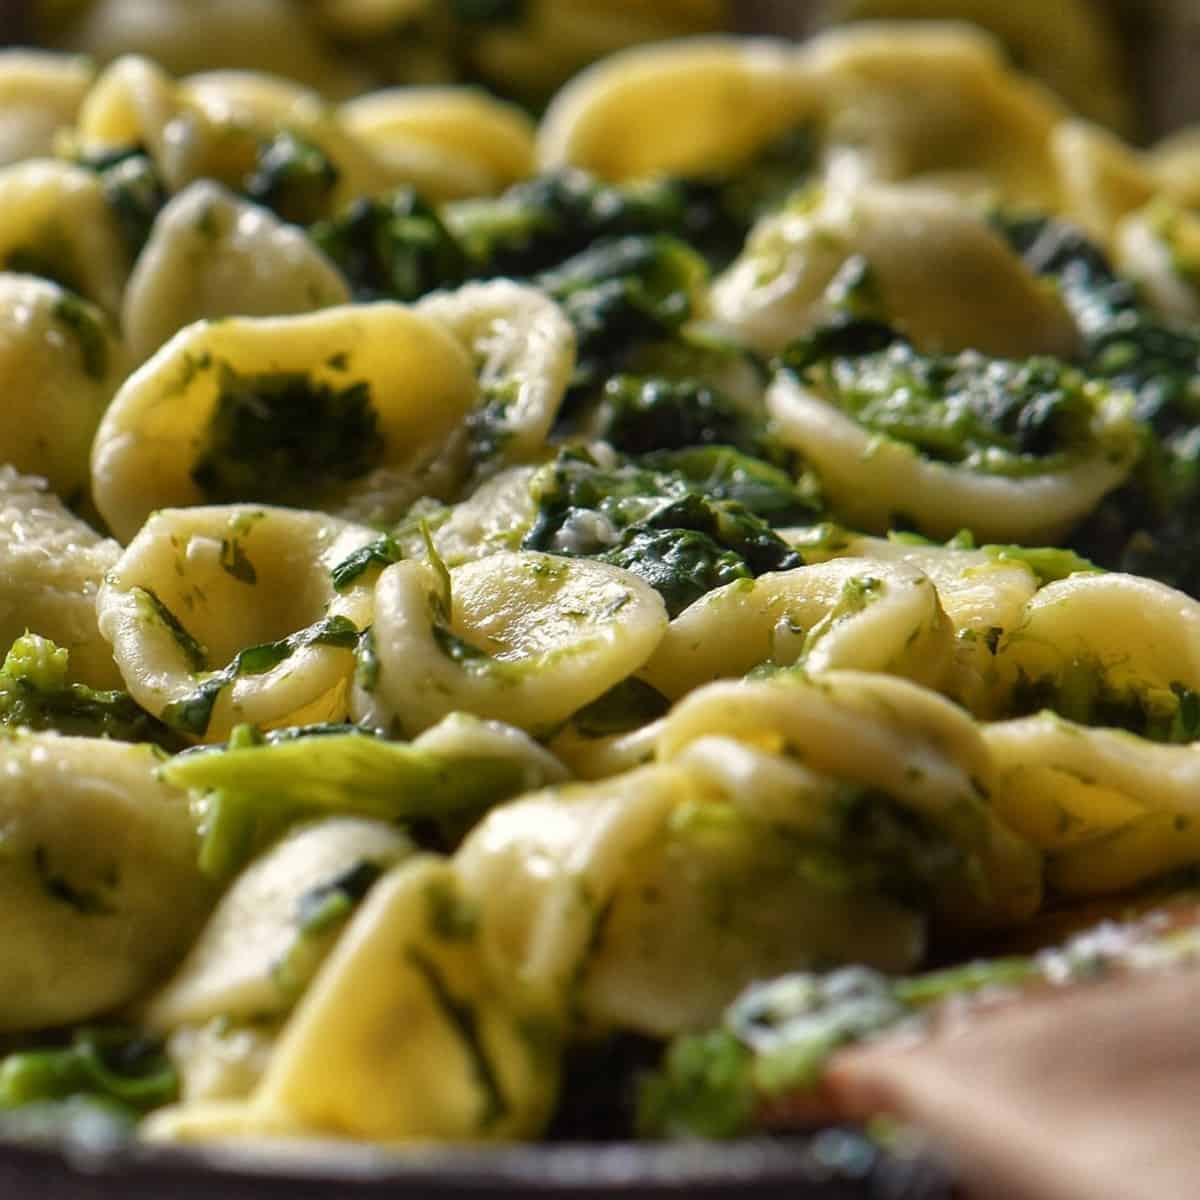 Orecchiette pasta with broccoli rabe tossed in a pan.